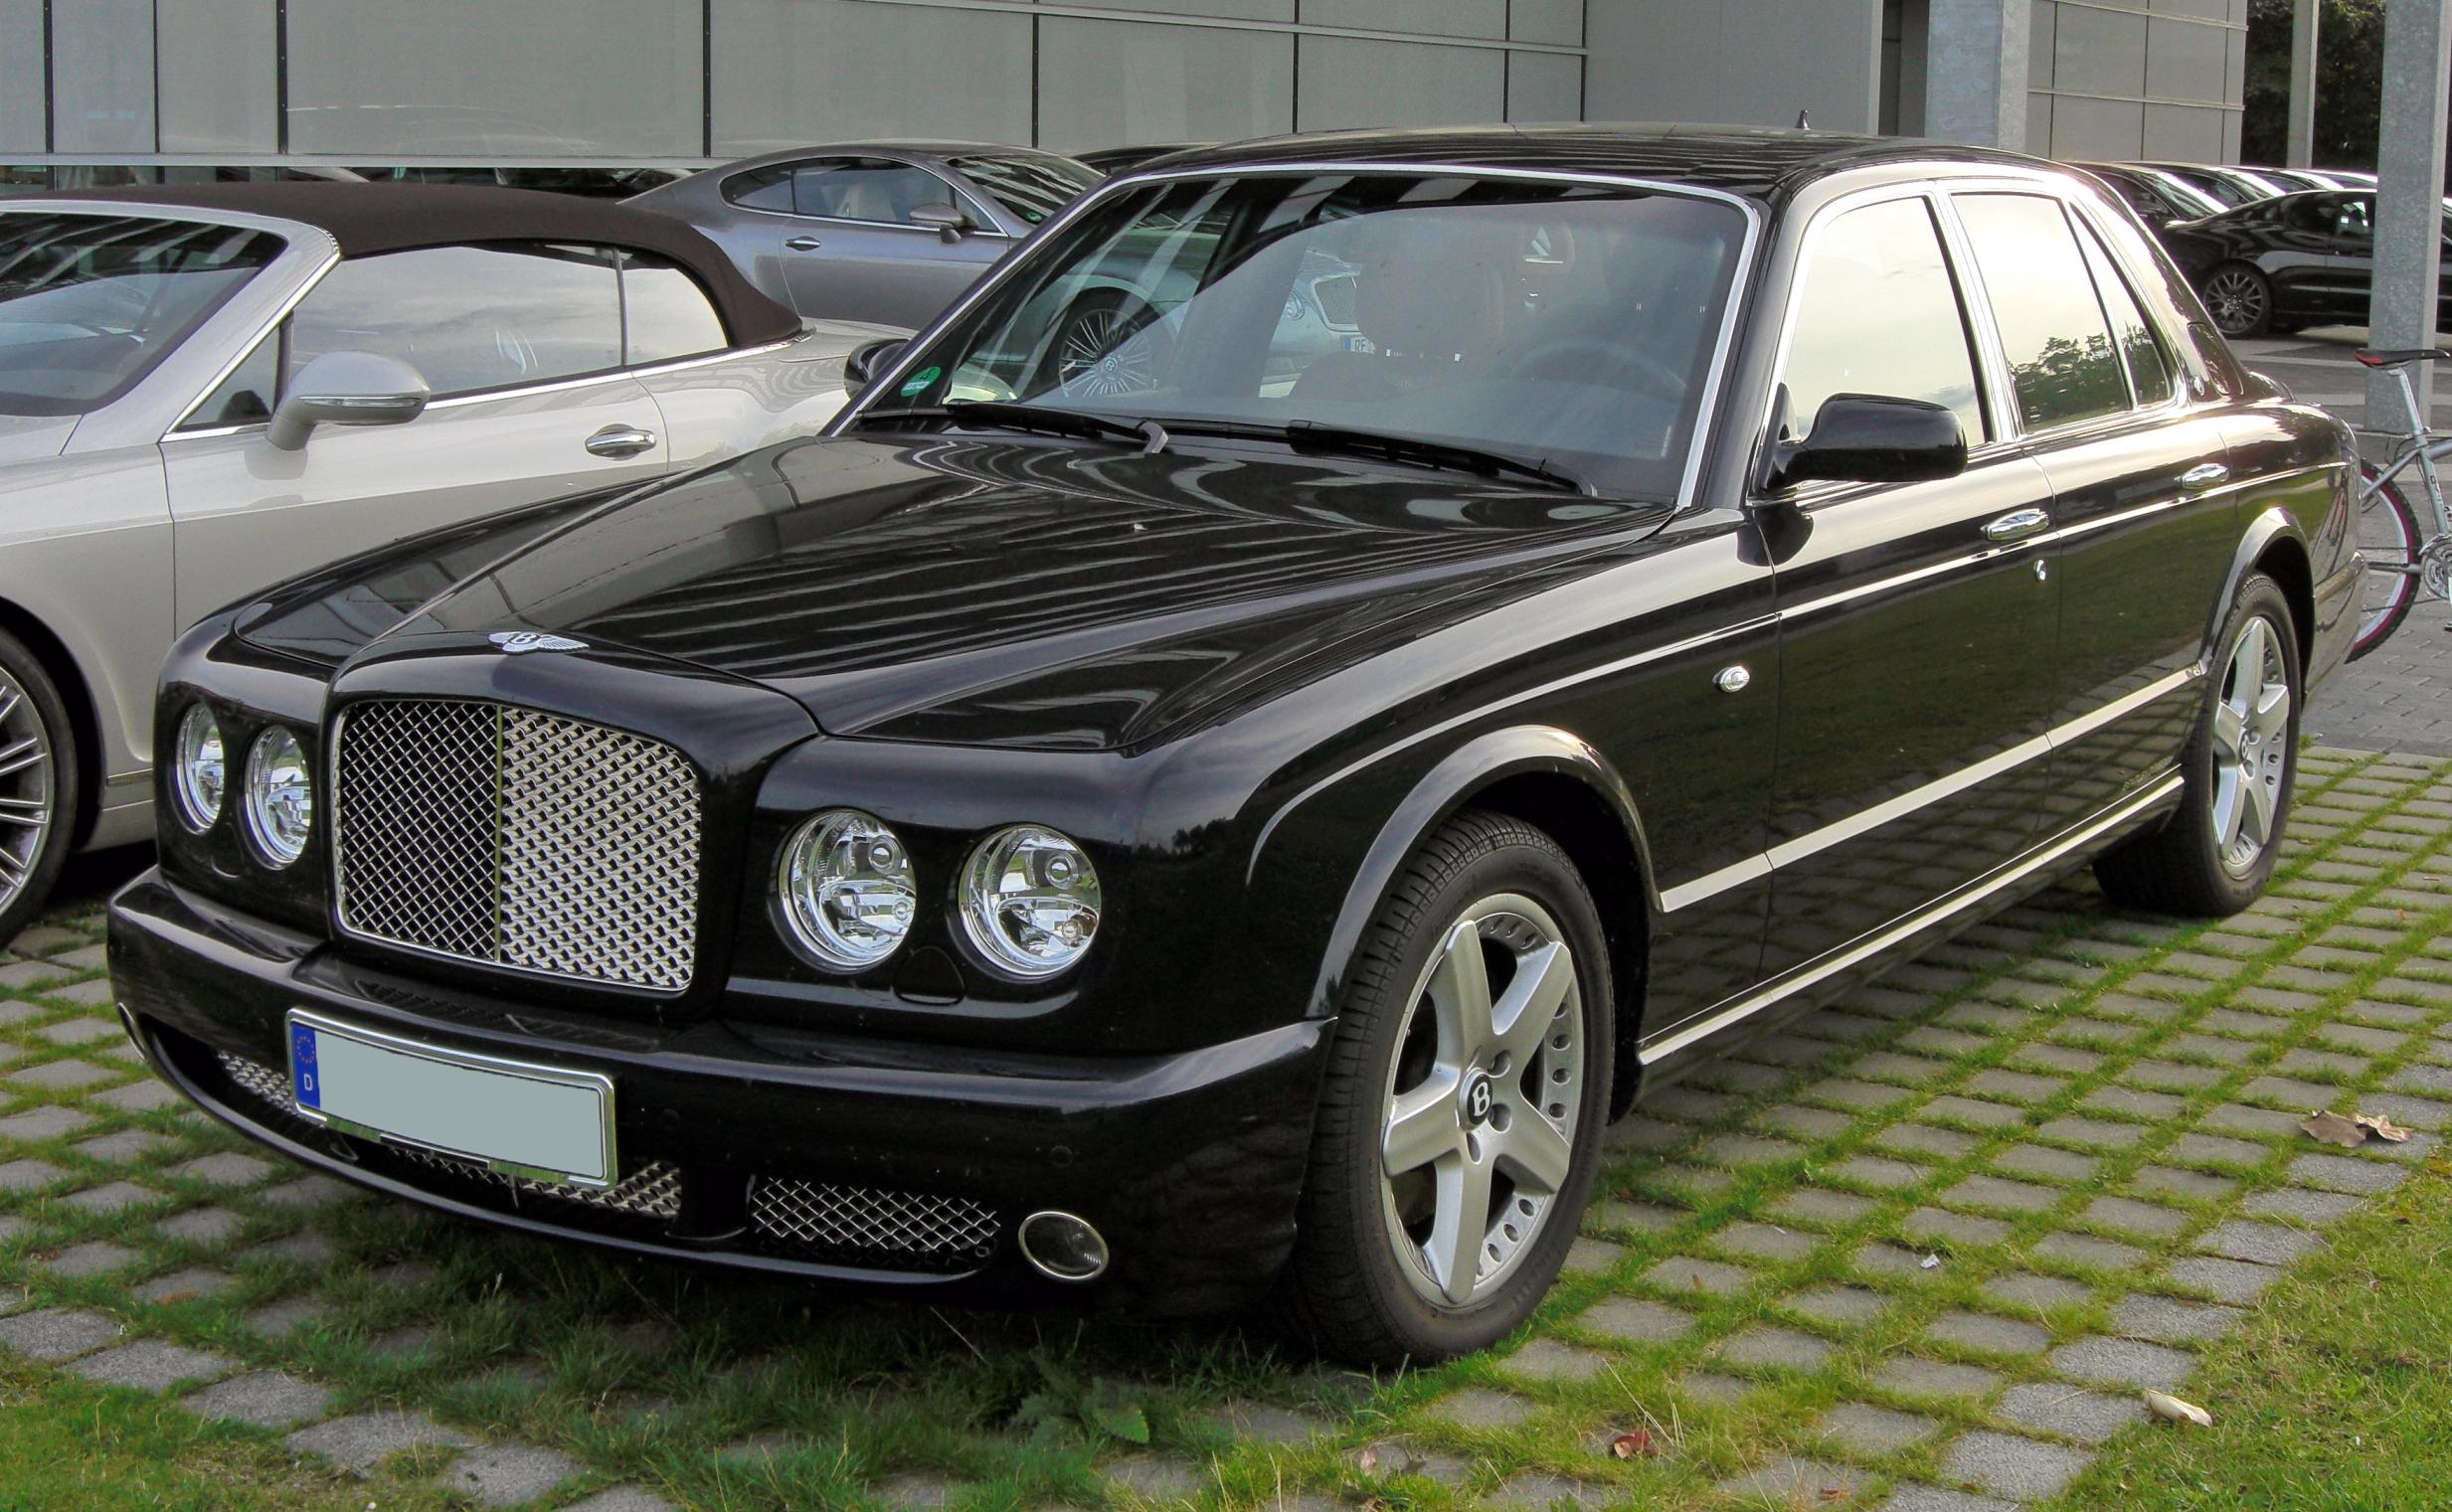 Bentley Arnage Backgrounds, Compatible - PC, Mobile, Gadgets| 2466x1521 px